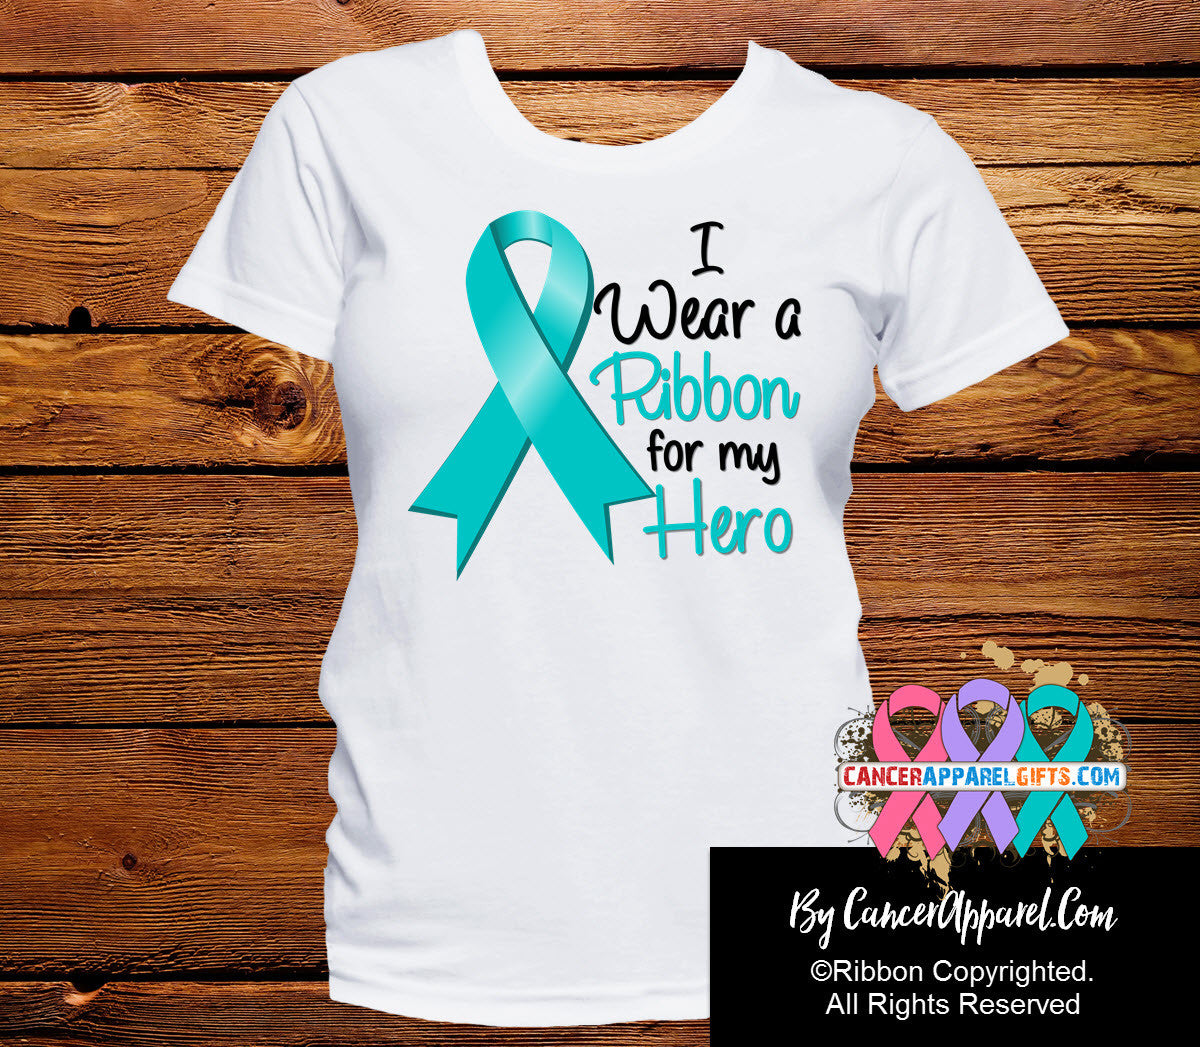 Ovarian Cancer For My Hero Shirts - Cancer Apparel and Gifts